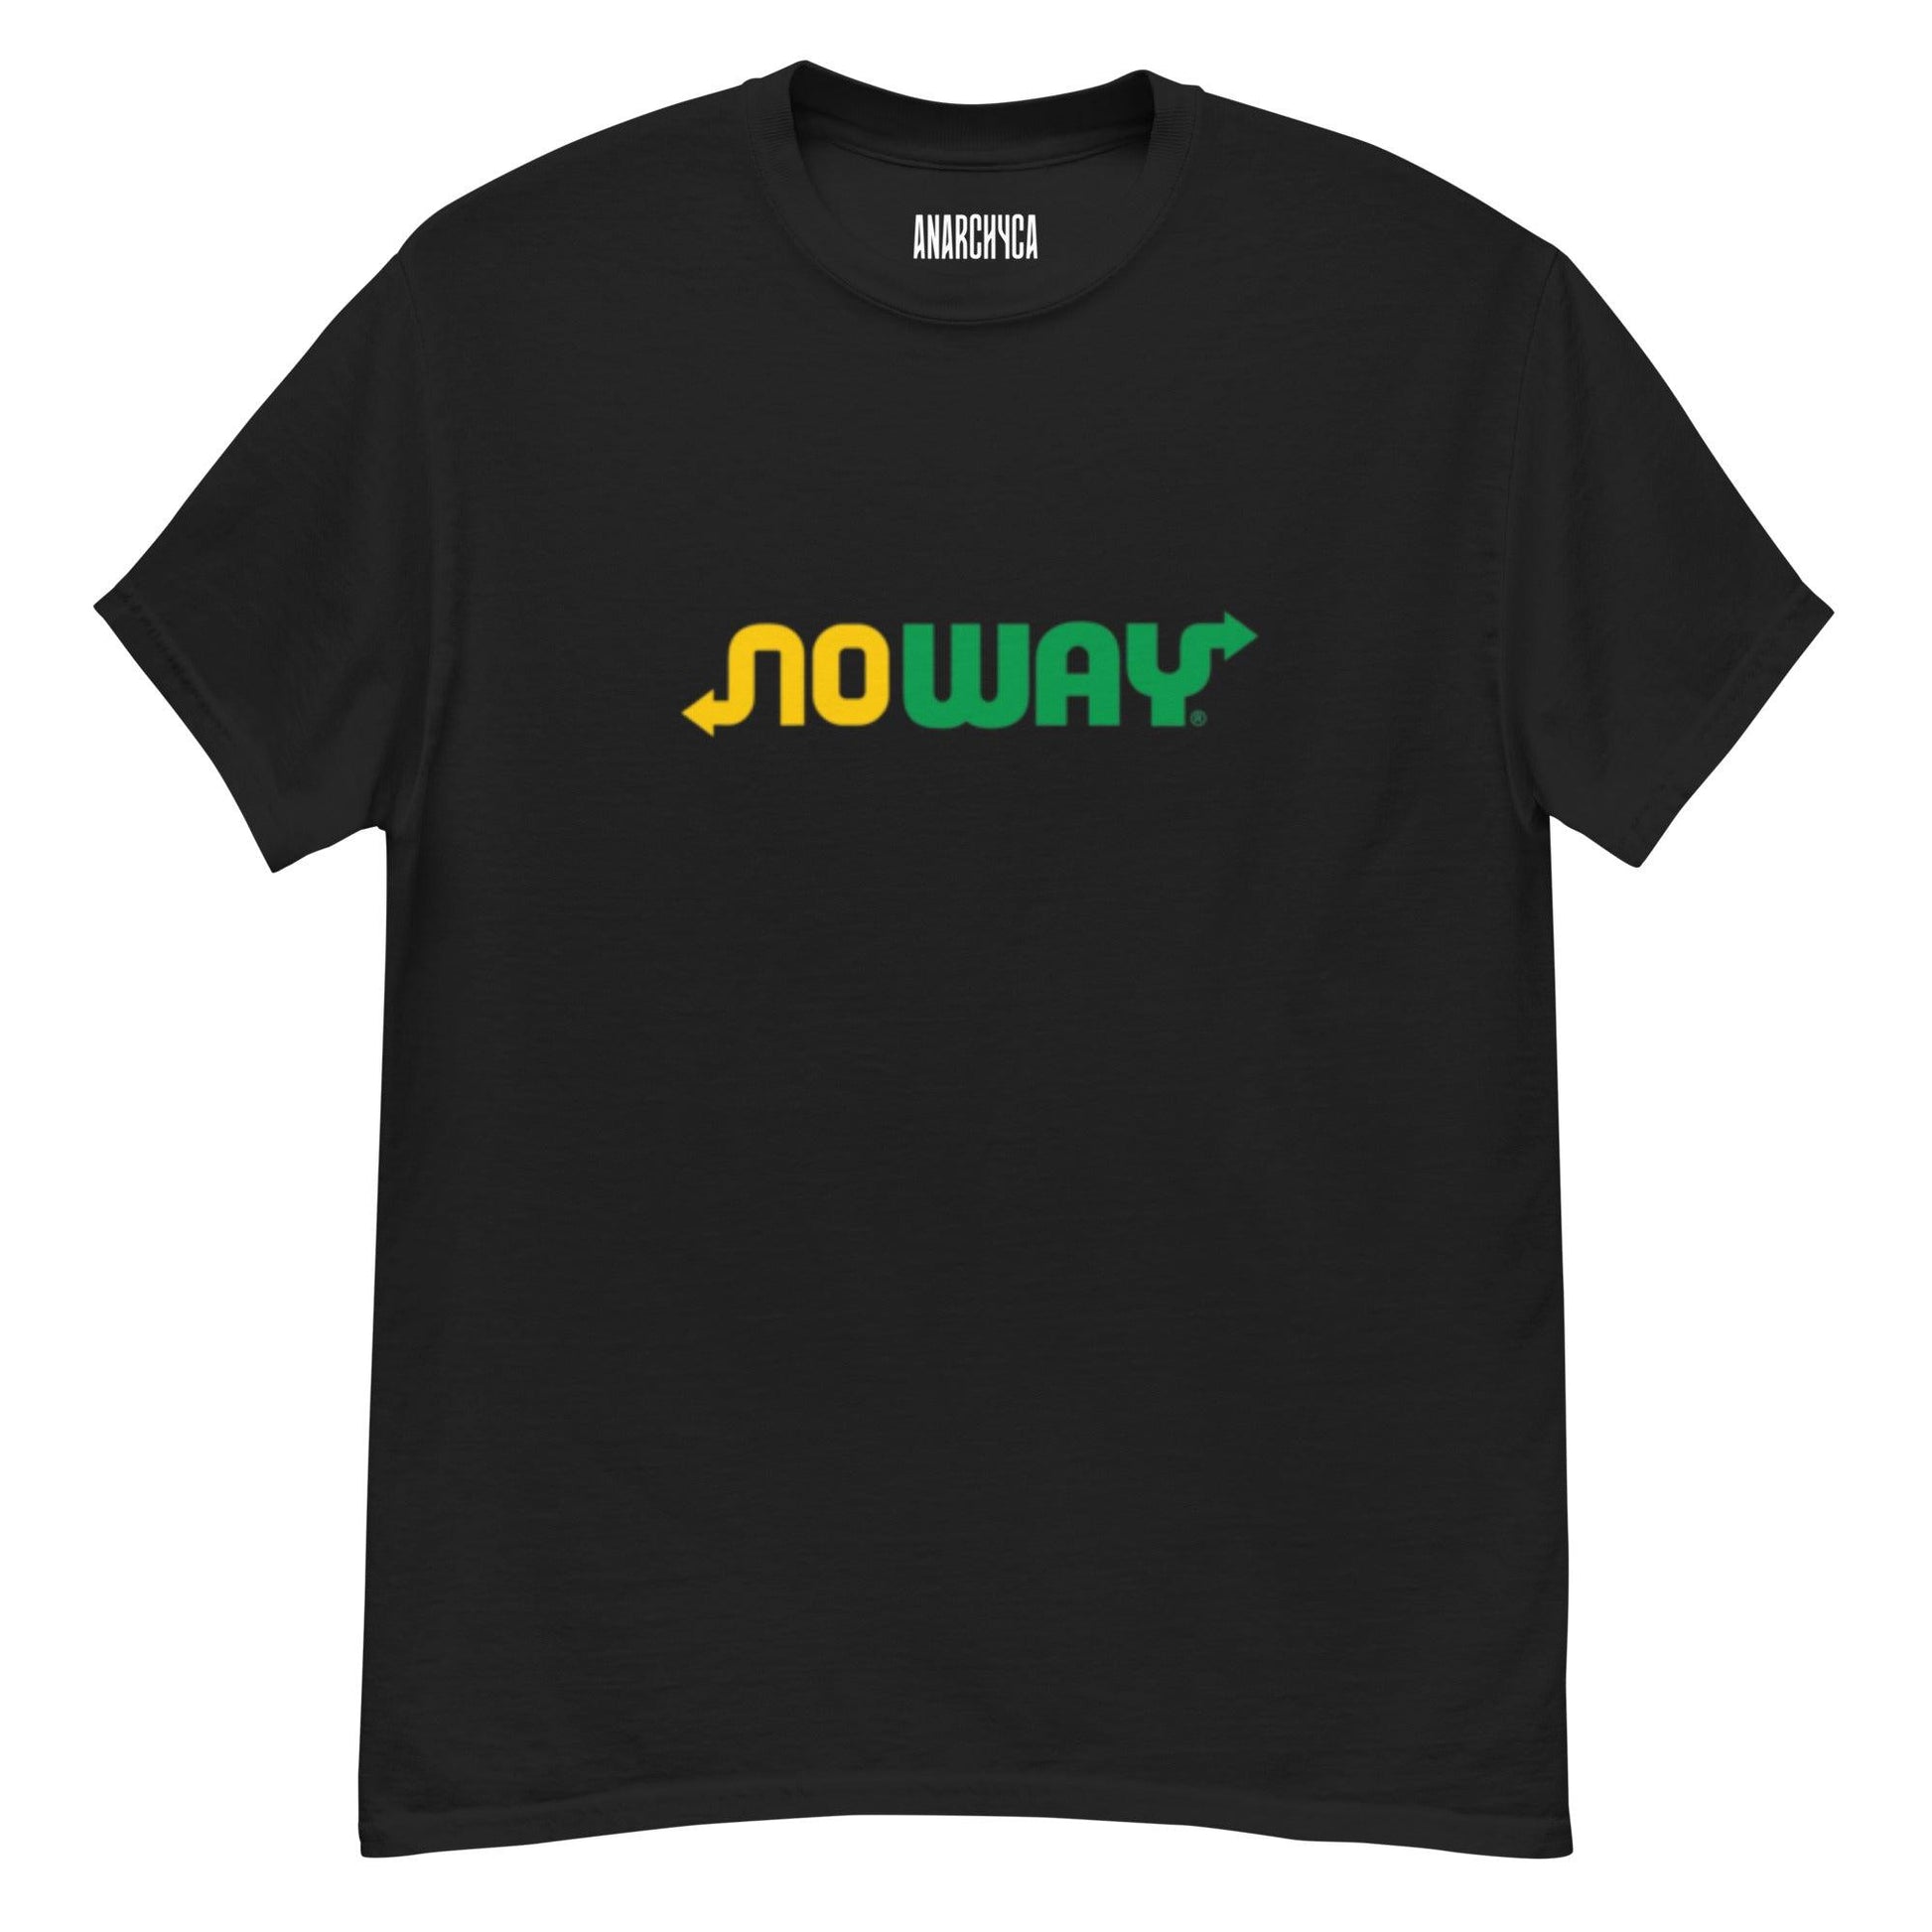 NOWAY - Anarchyca-clothing